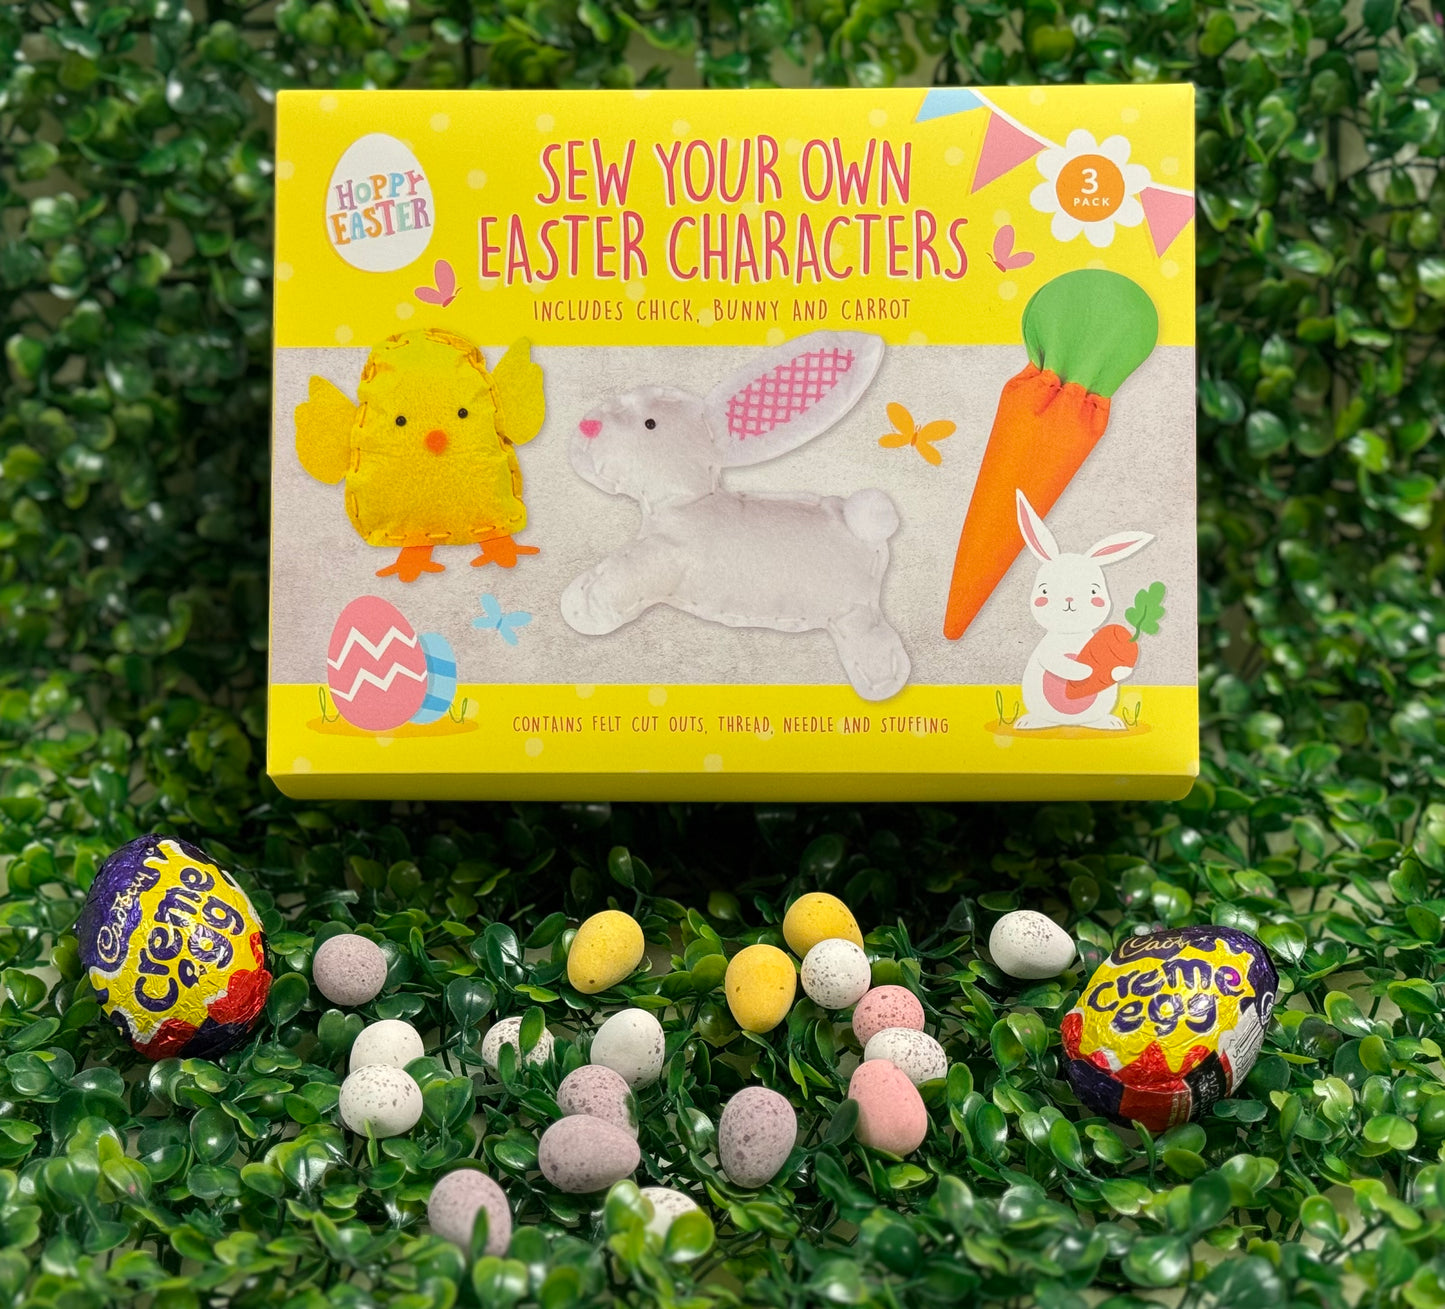 * Sew Your Own Easter Characters 3 Pack